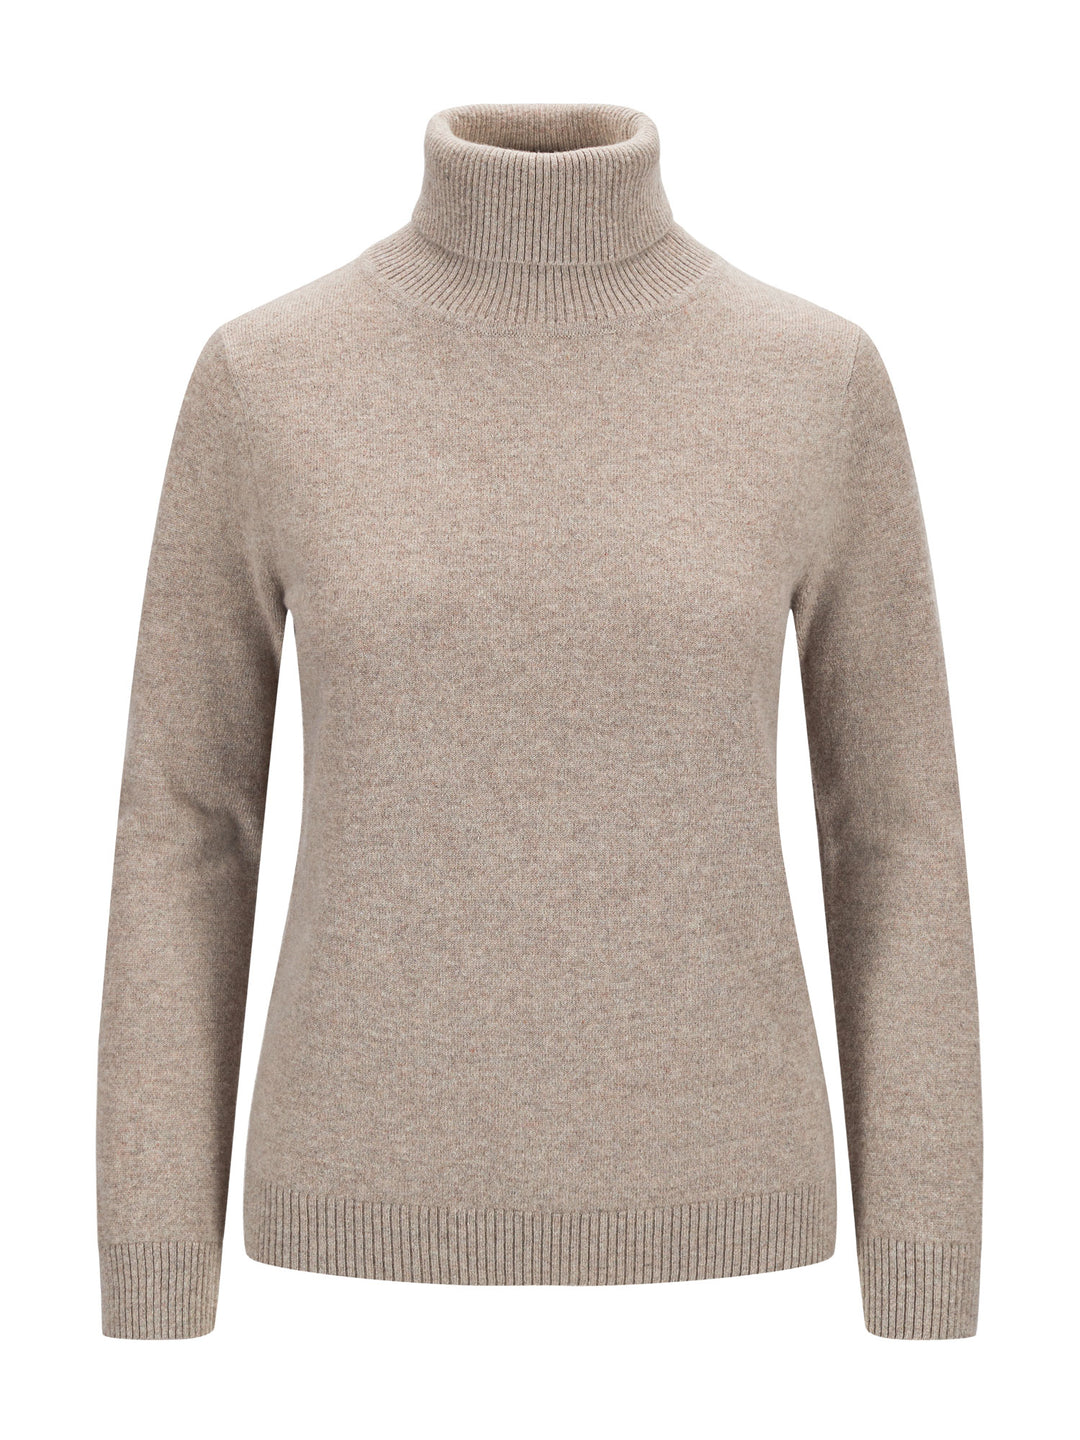 Turtleneck cashmere sweater, toast (light brown) color. 100% pure cashmere. Scandinavian design by KASHMINA of Norway.